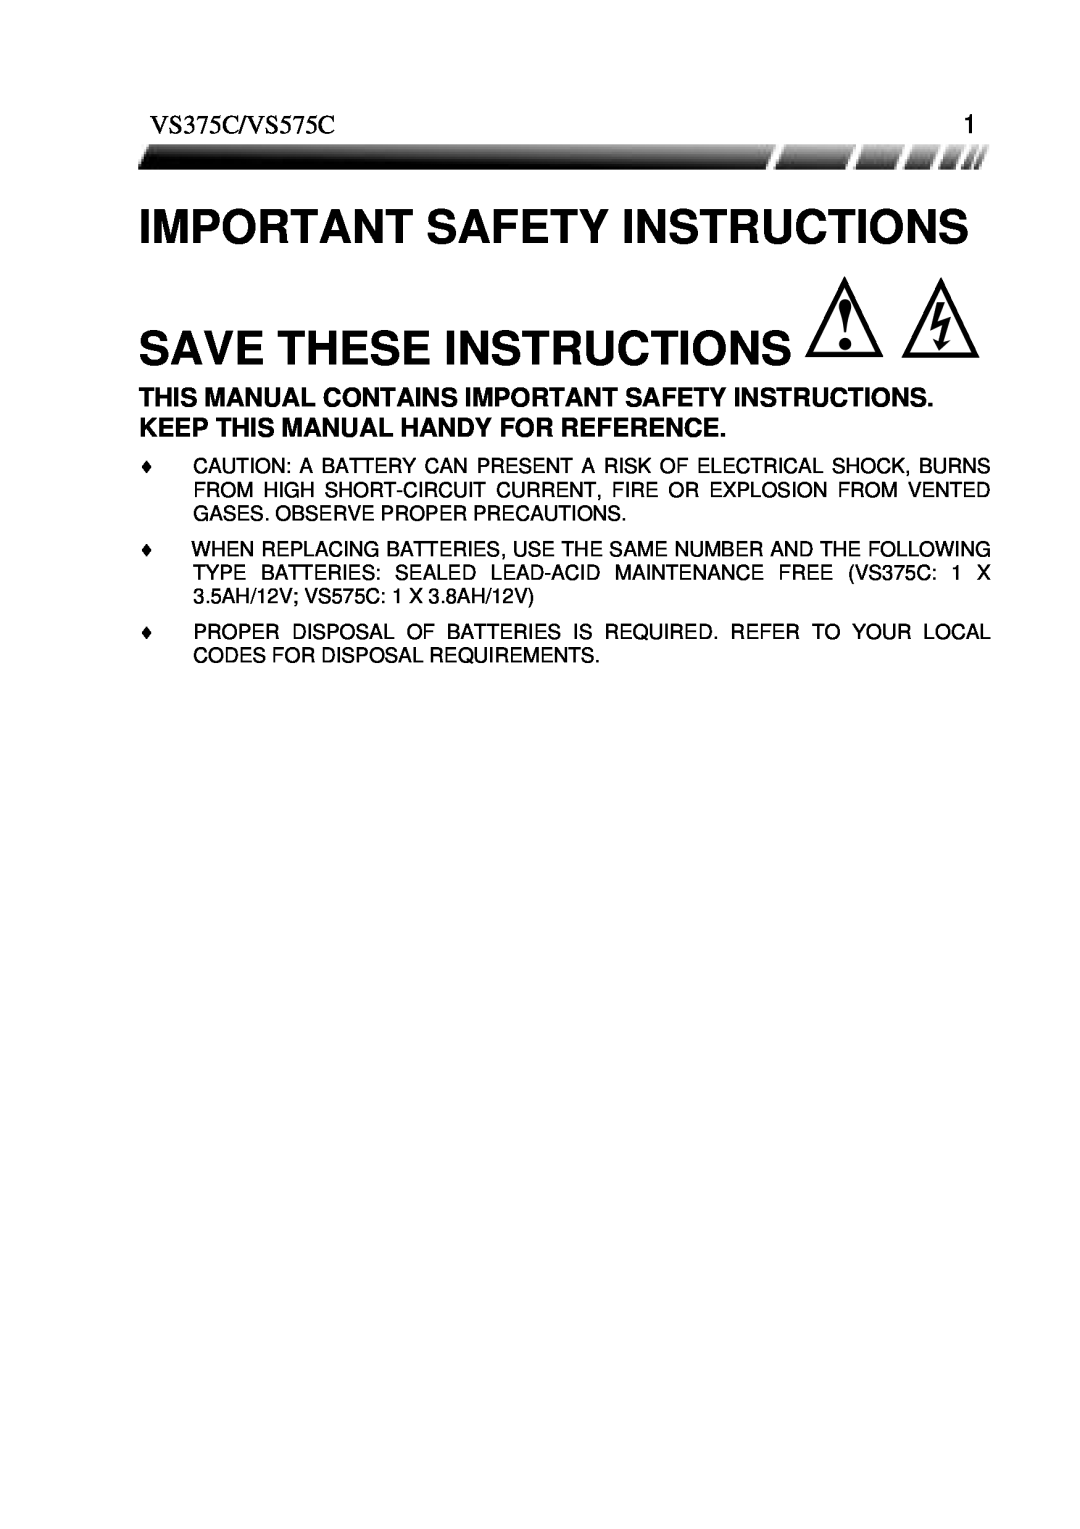 ViewSonic manual VS375C/VS575C, Important Safety Instructions Save These Instructions 